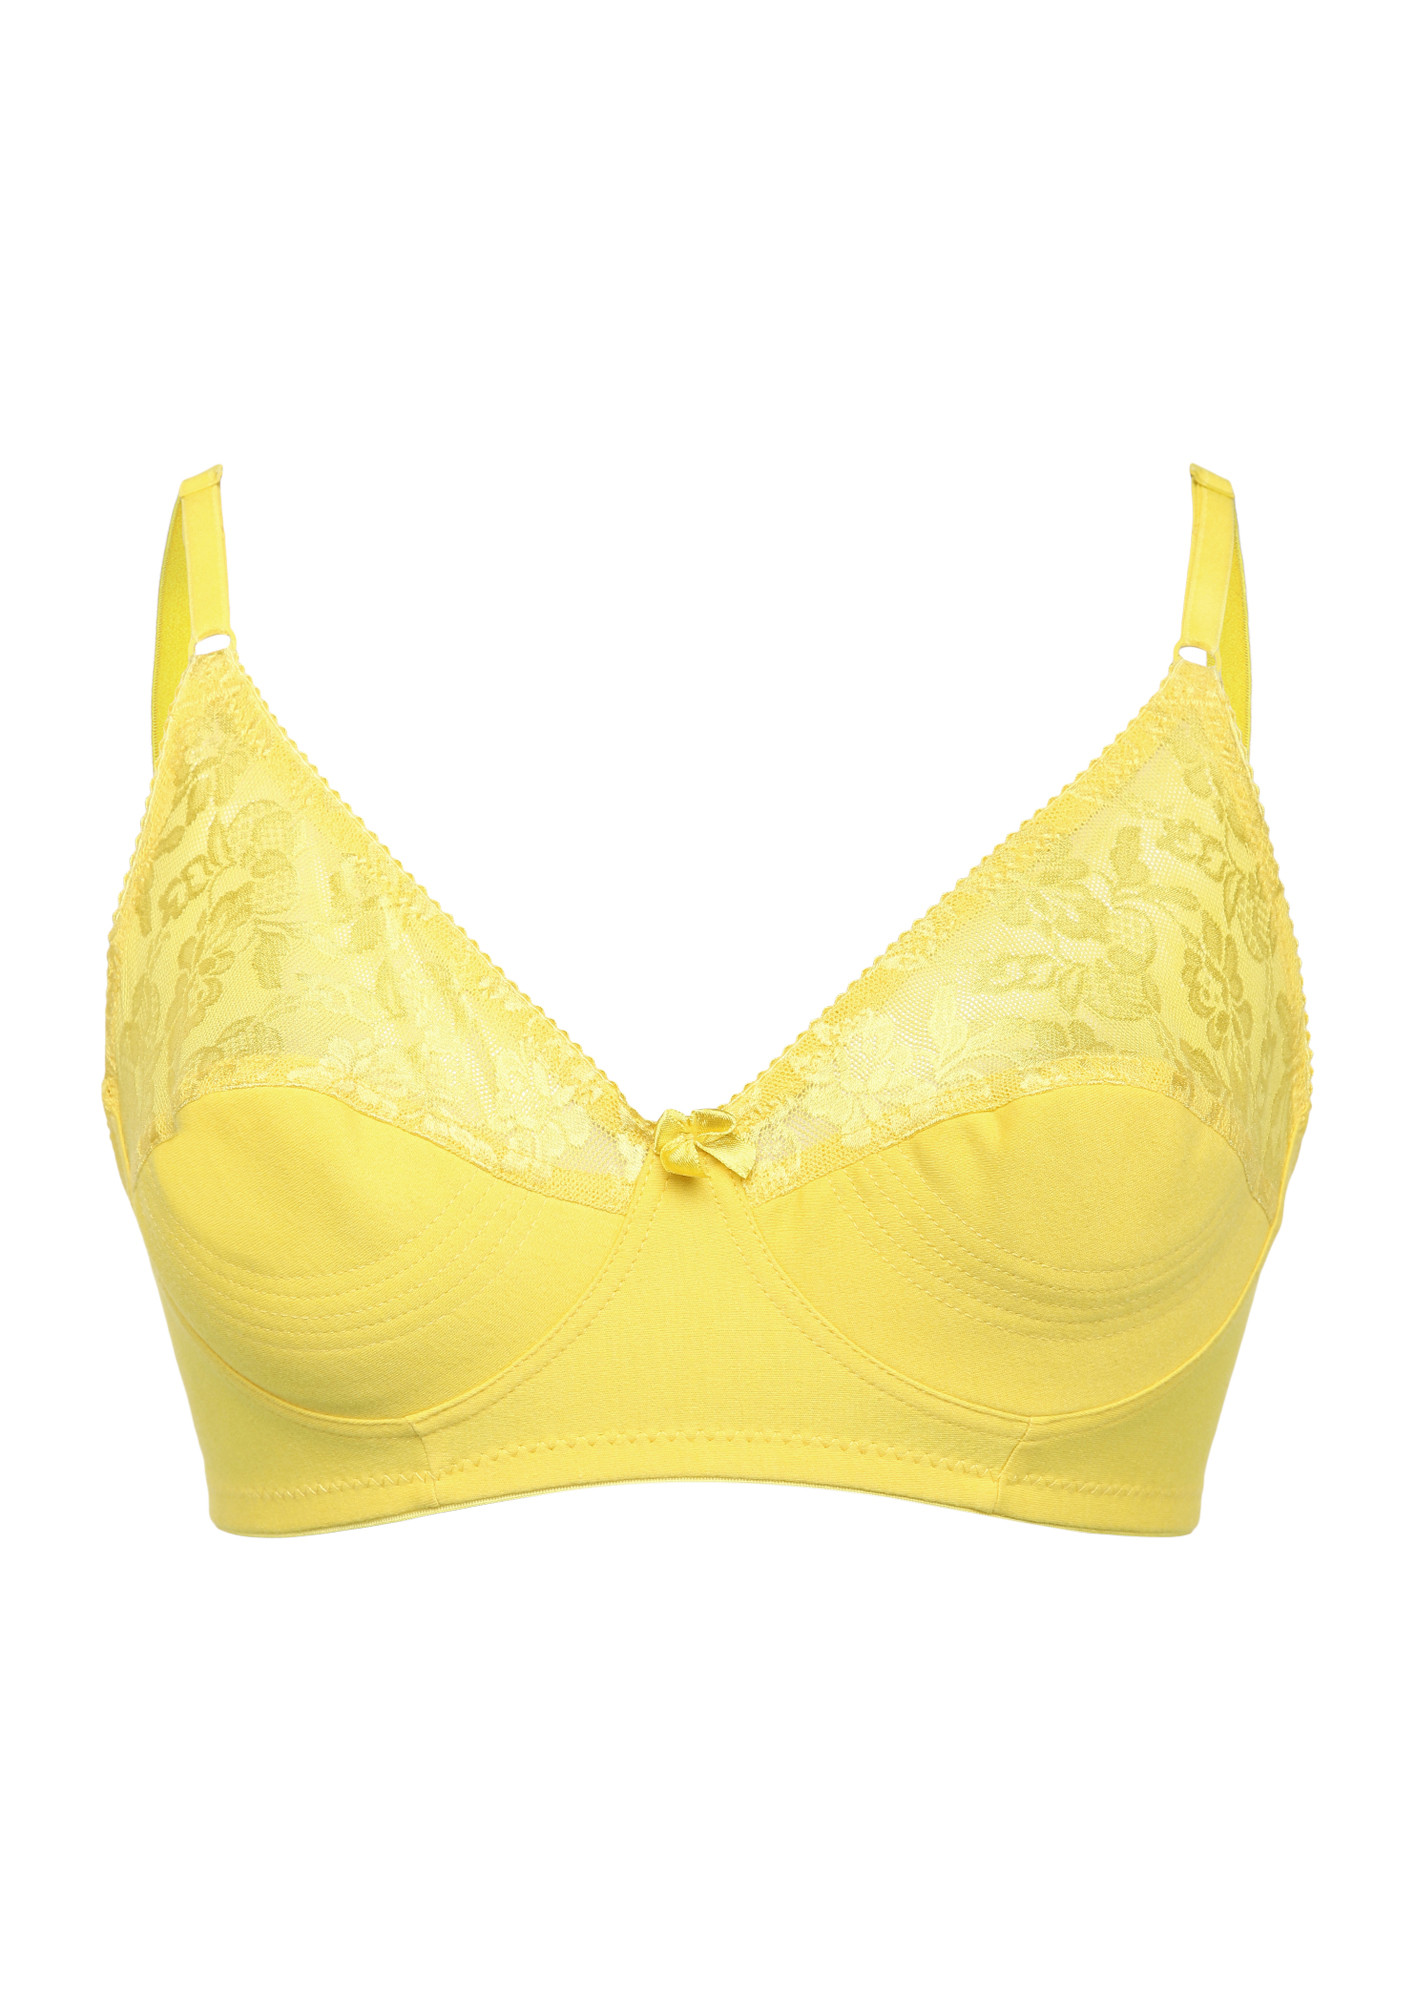 PLAY TIME NON PADDED NON WIRED FULL COVERAGE YELLOW BRA